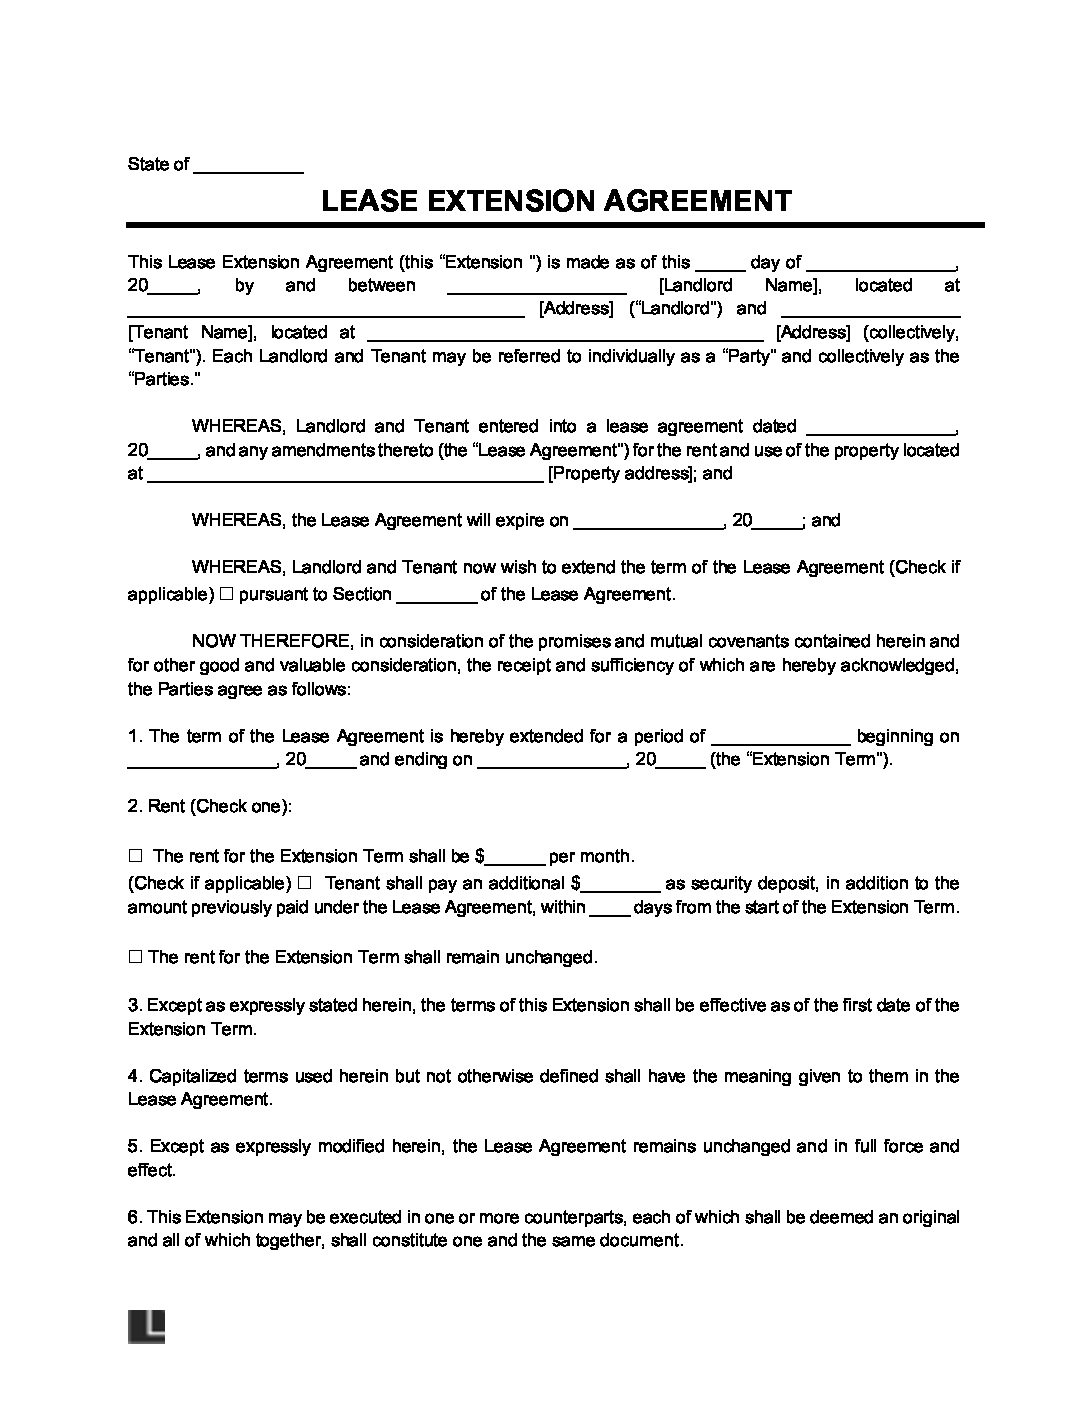 lease-extension-agreement-form-massachusetts-printable-form